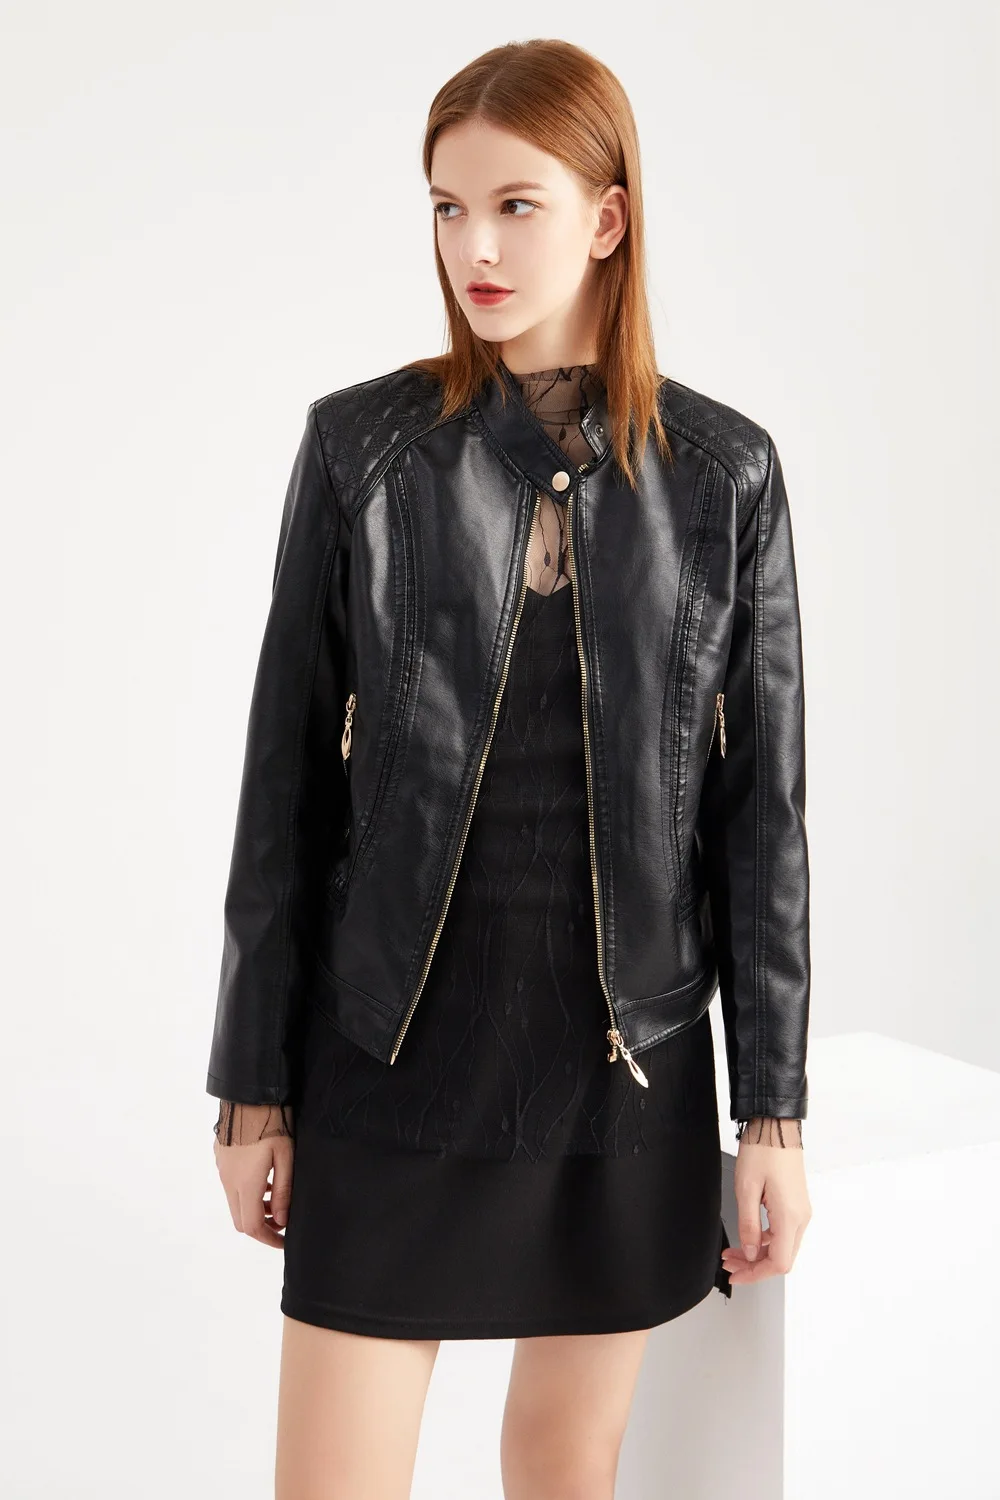 Spring and Autumn Women's Leather Jacket Stand Collar Ladies Coat Motorcycle Clothing